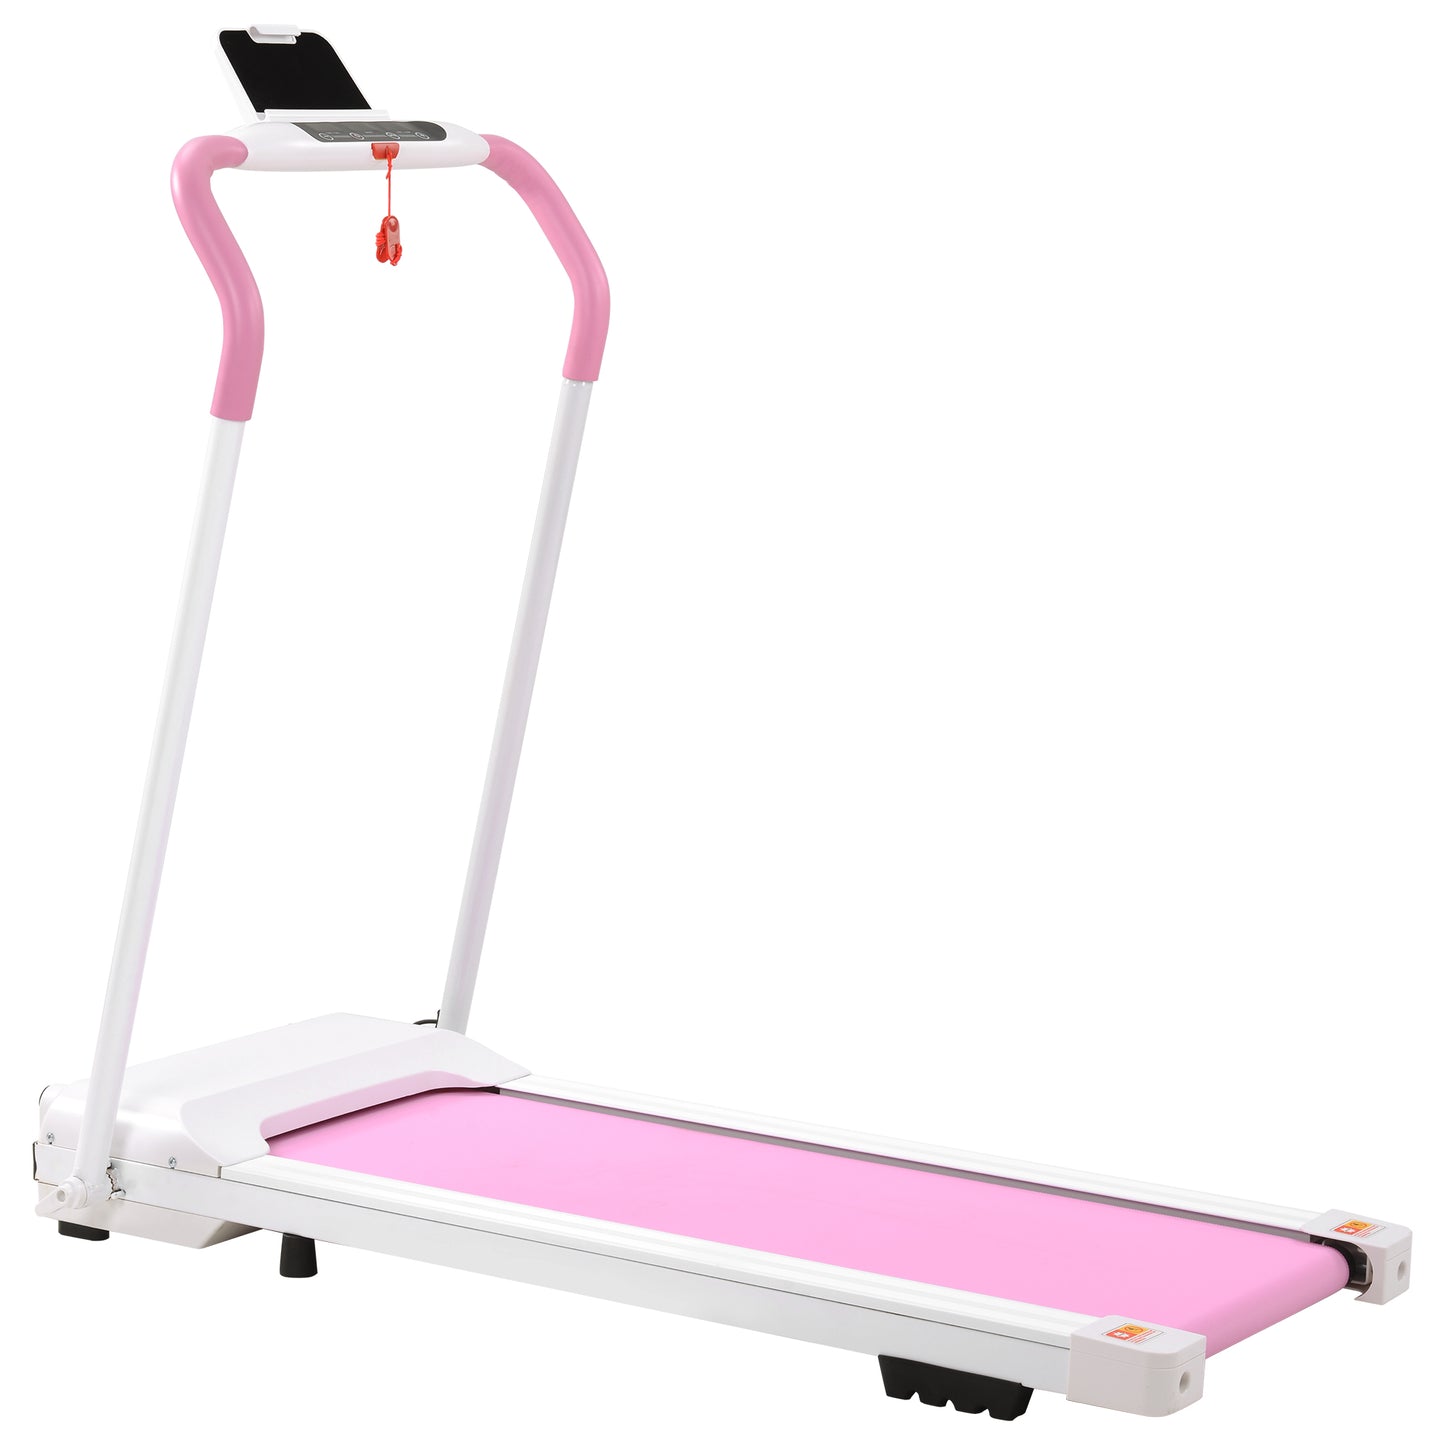 FYC Treadmill Folding Treadmill for Home Portable Electric Motorized Treadmill Running Exercise Machine Compact Treadmill for Home Gym Fitness Workout Walking, No tallation Required, WhitePink